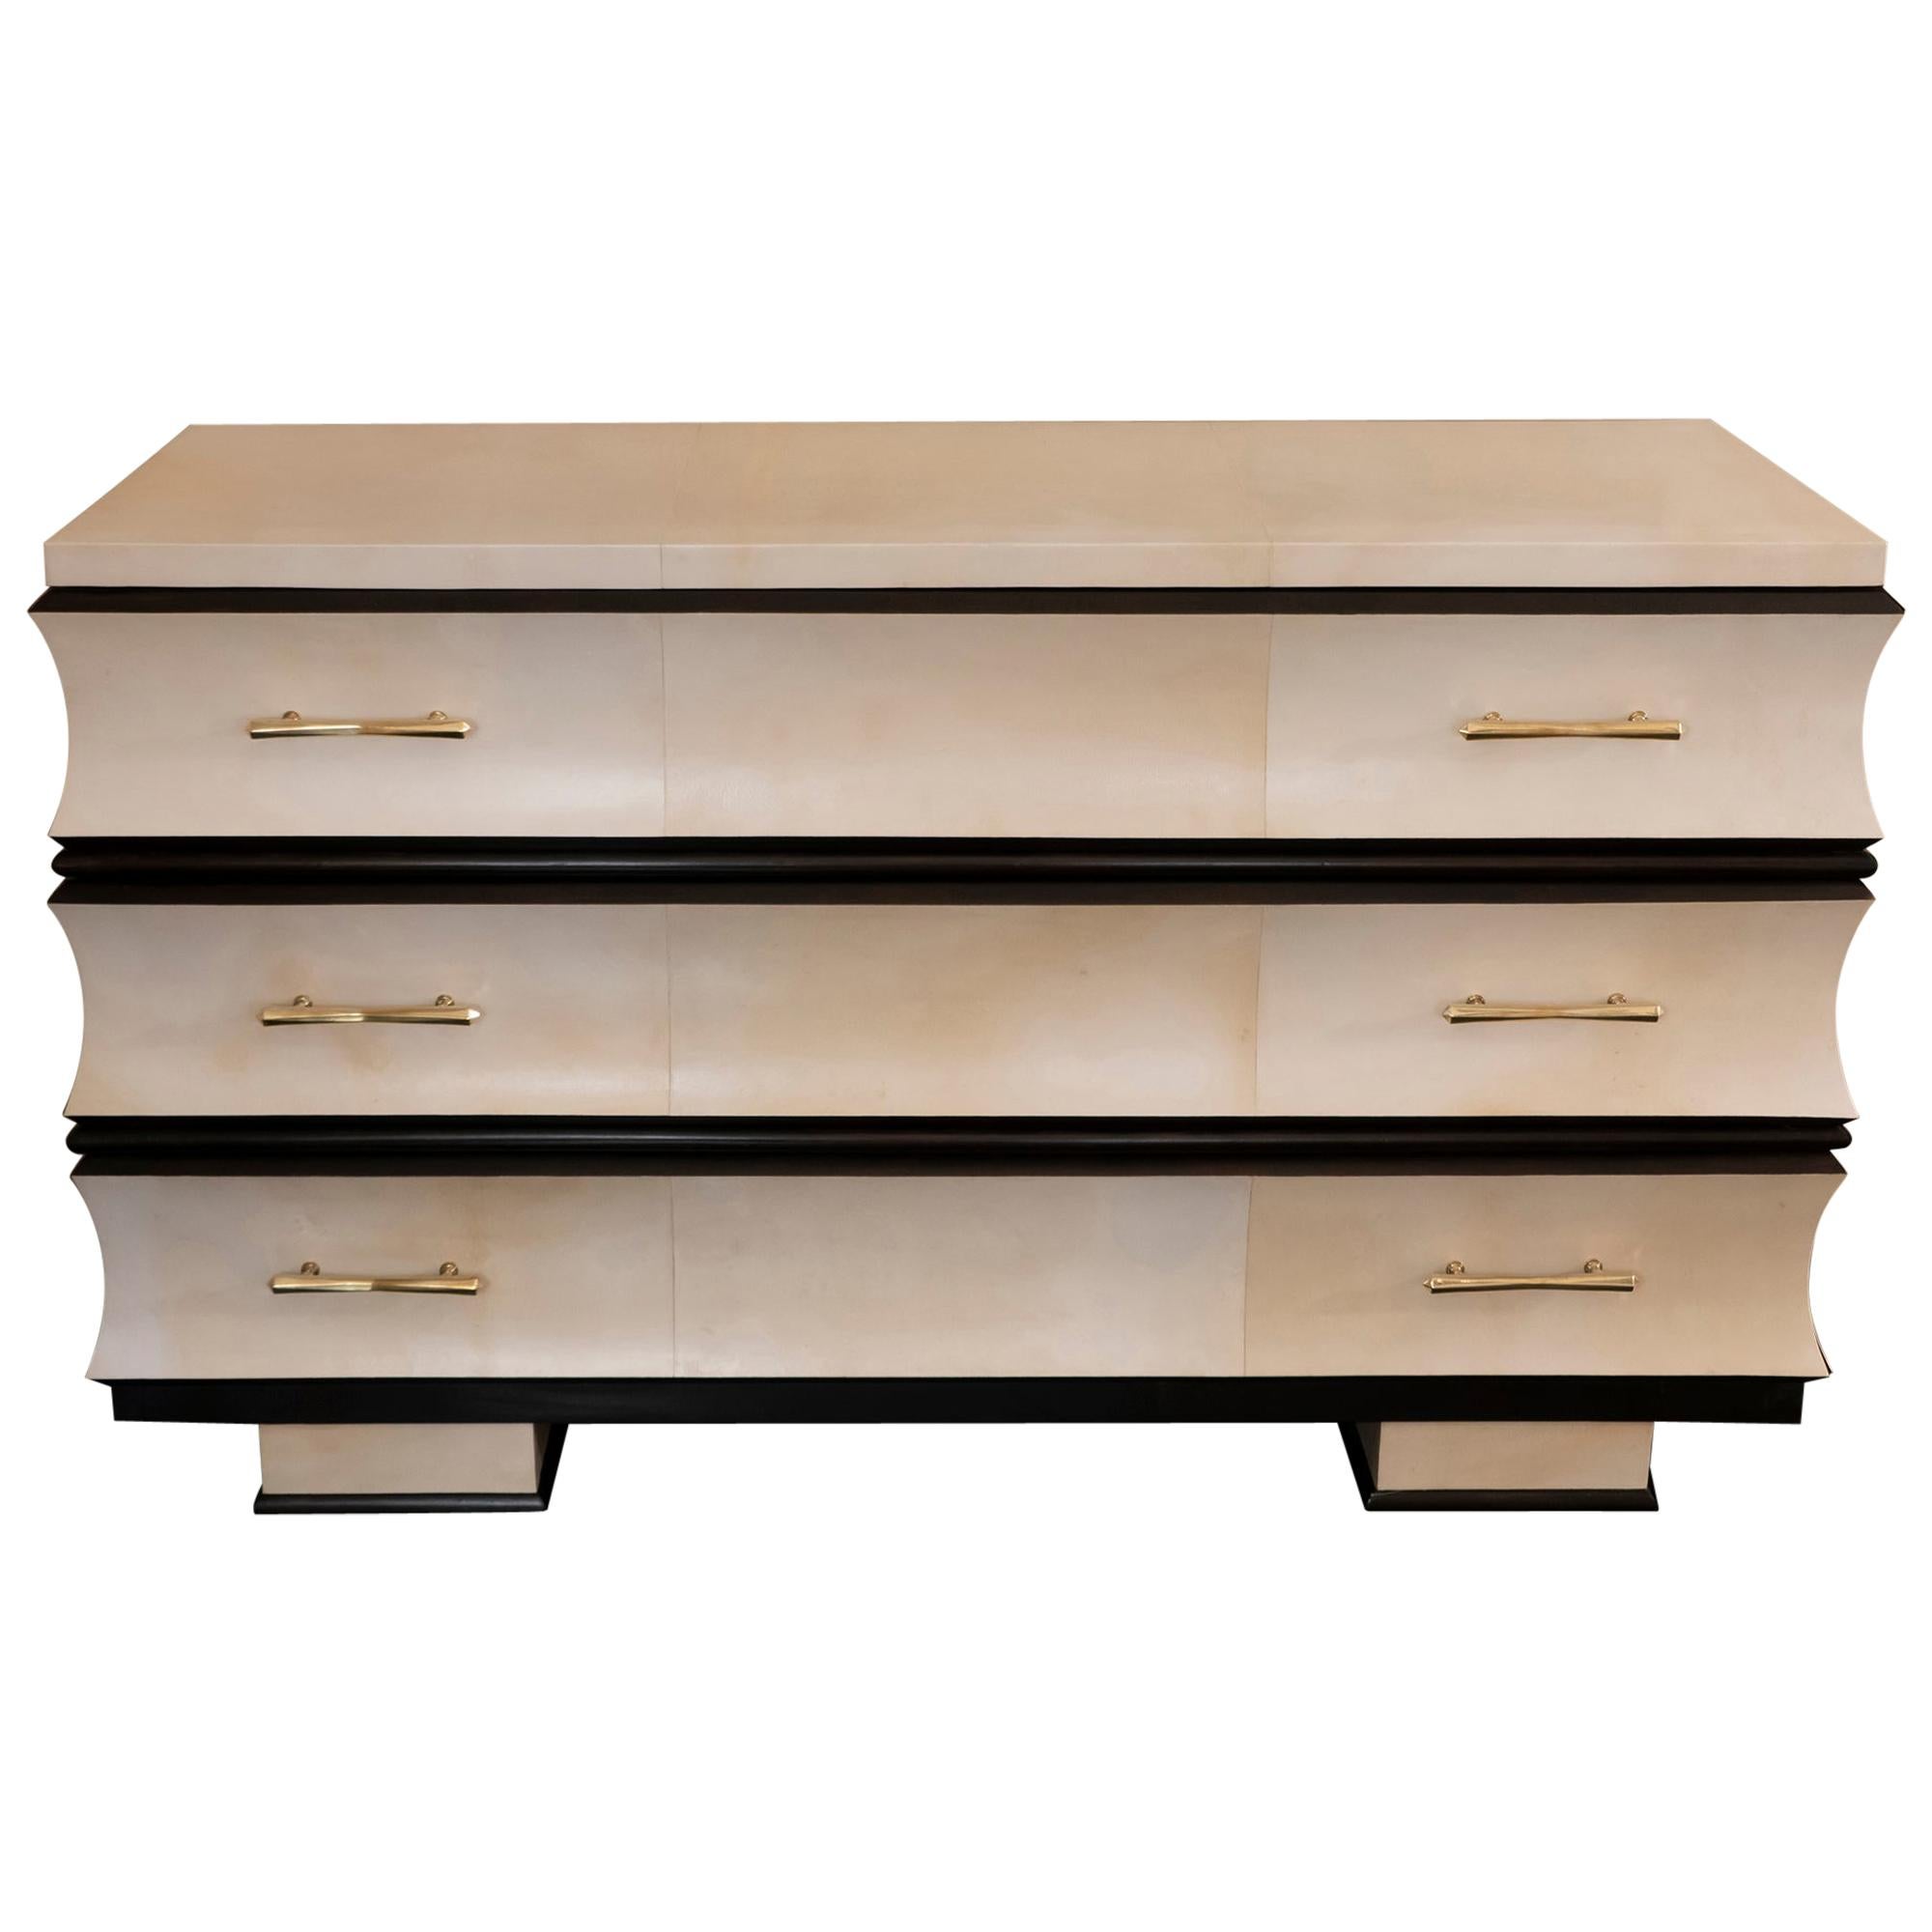 1950s Italian Chest of Drawers, Parchment and Ebonized Wood, Brass Details